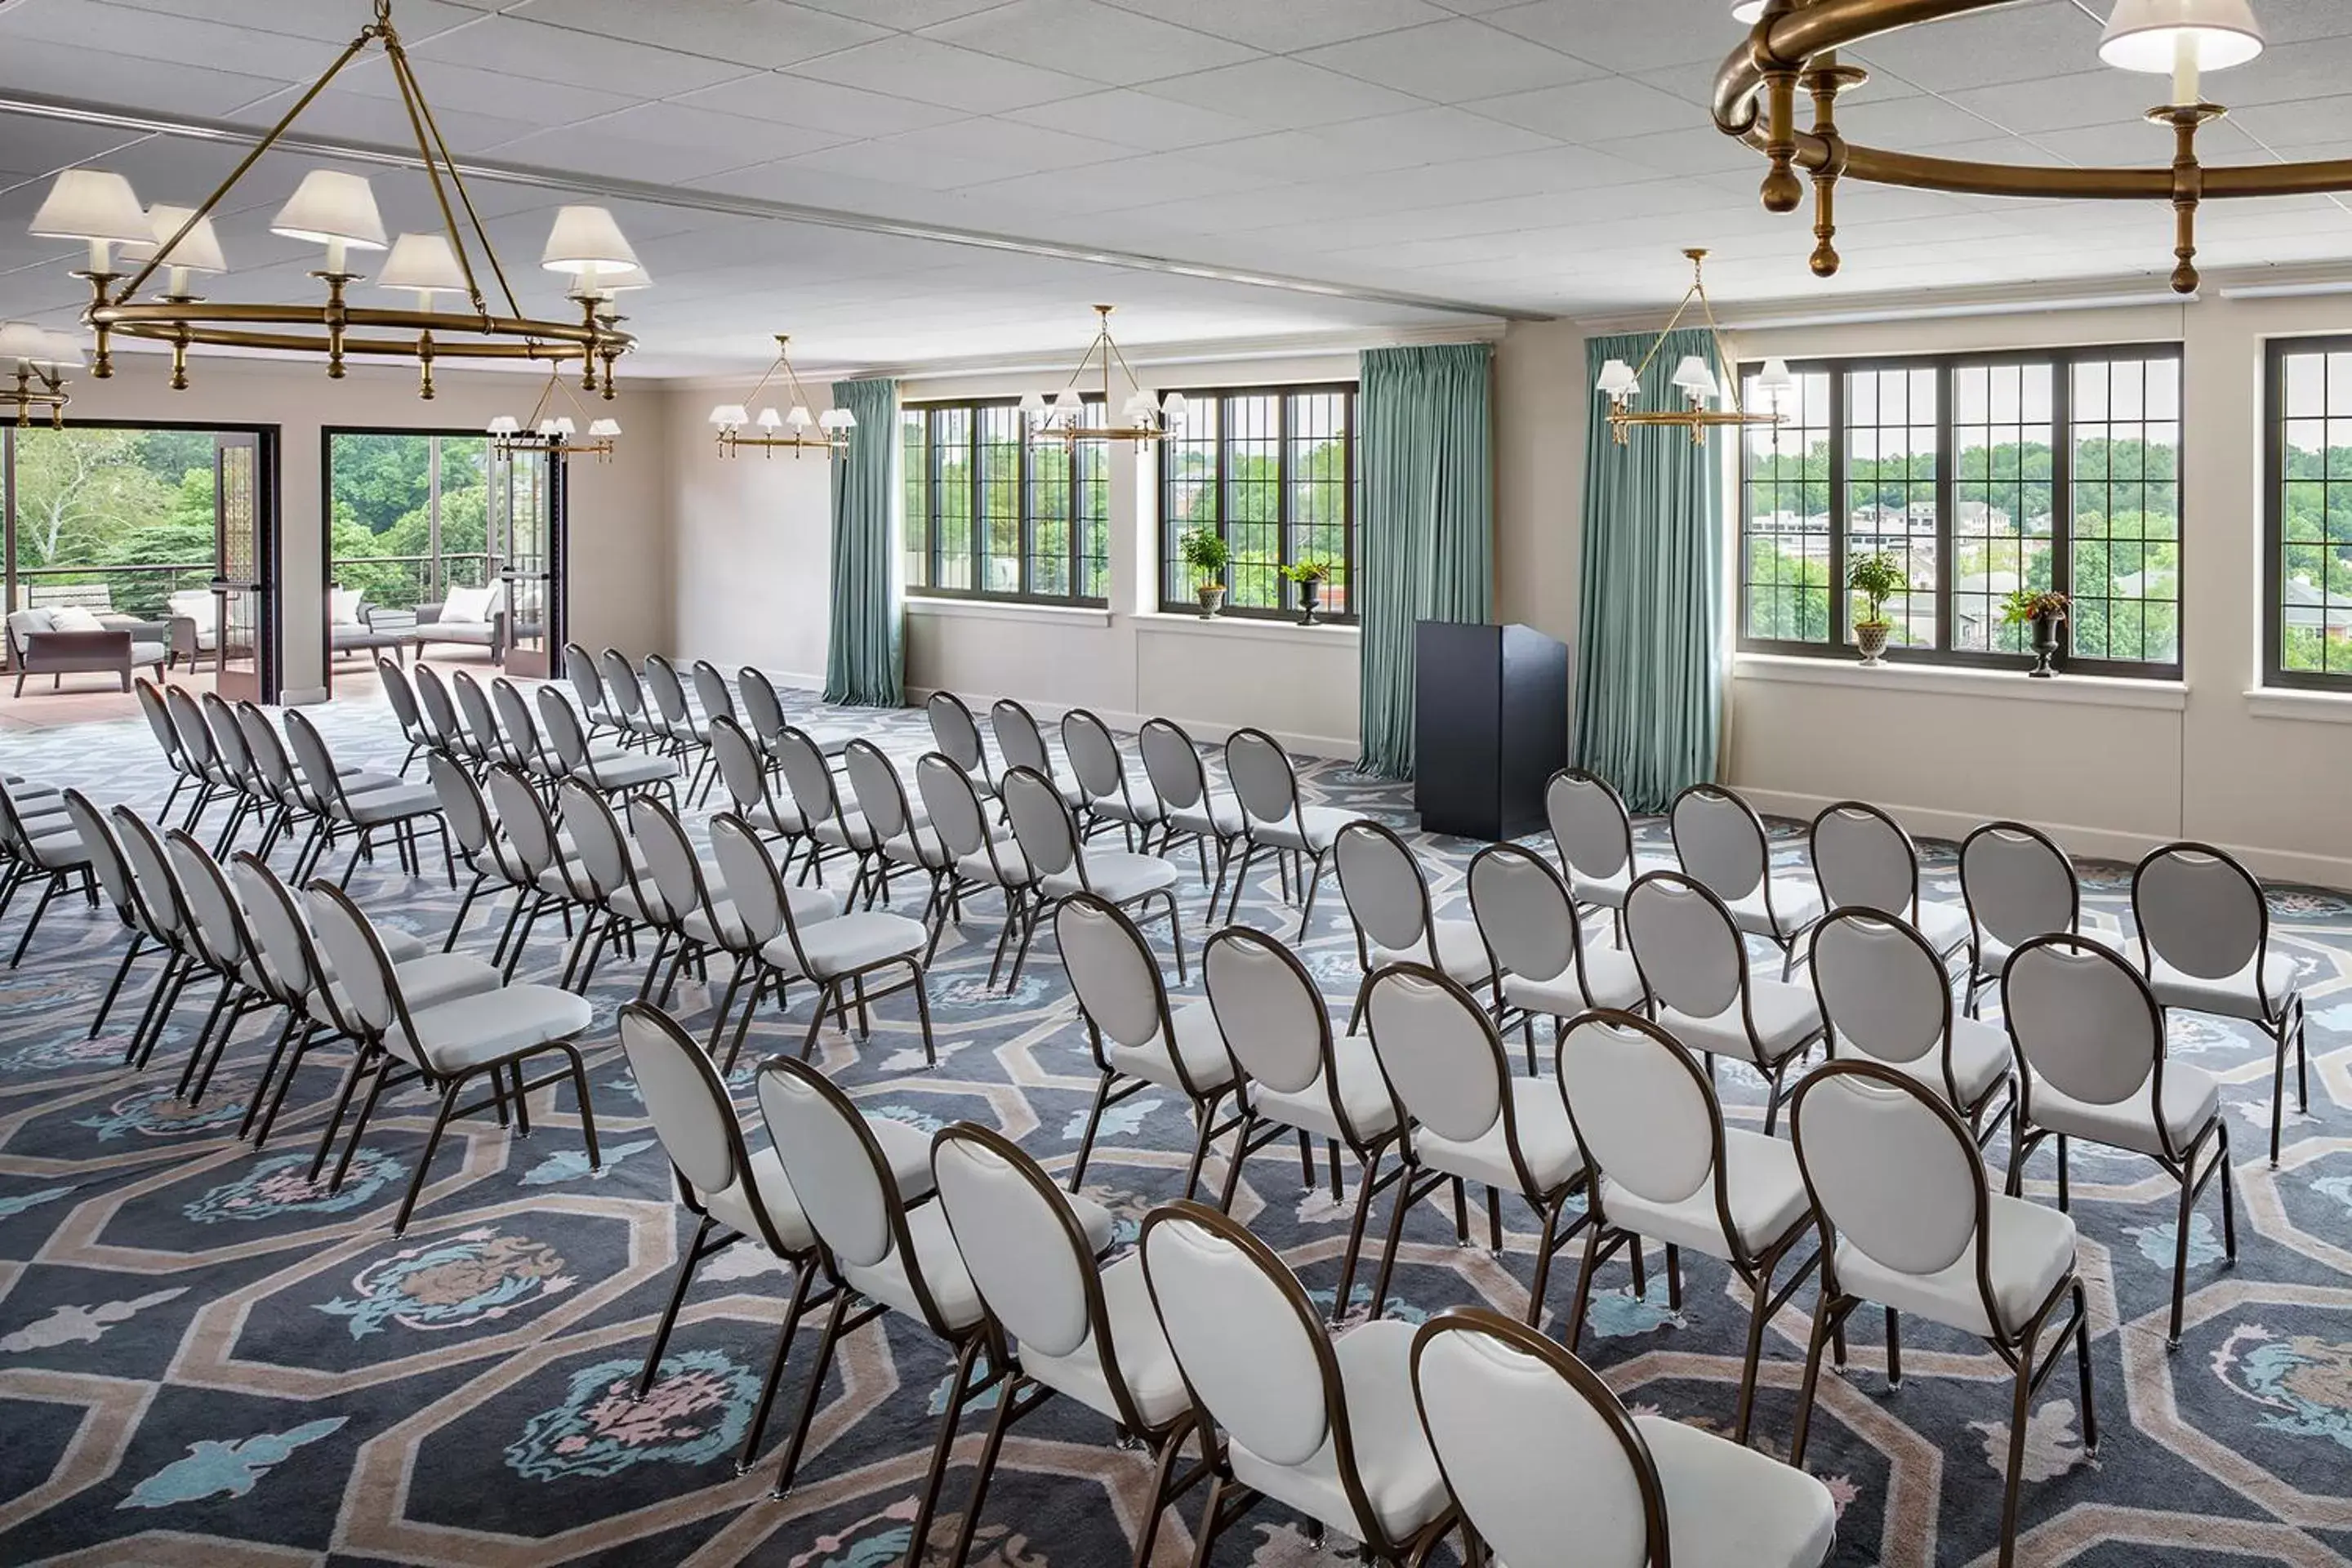 Business facilities, Banquet Facilities in Graduate Charlottesville